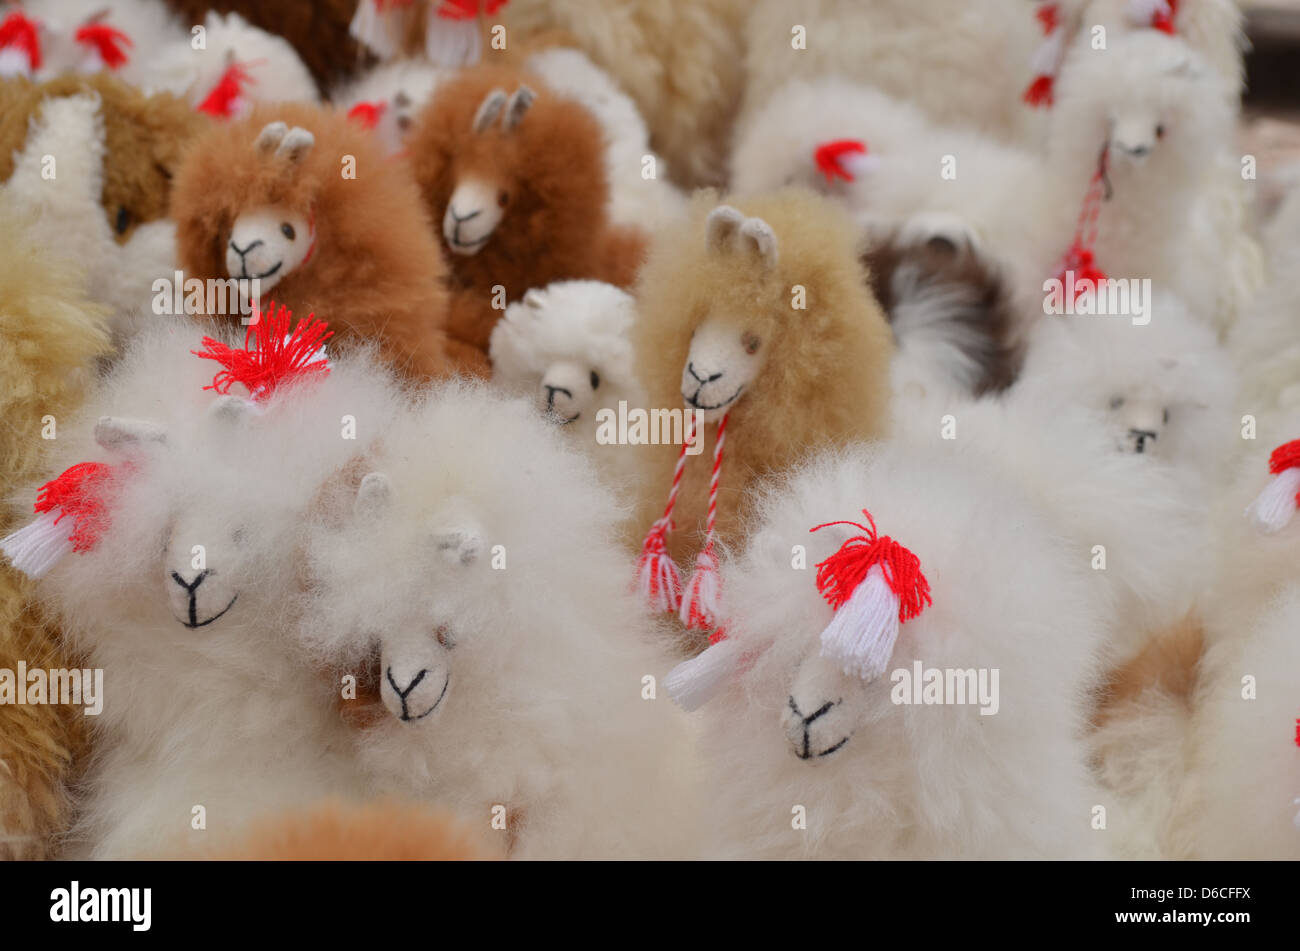 Llama toys on sale in a market in Peru Stock Photo